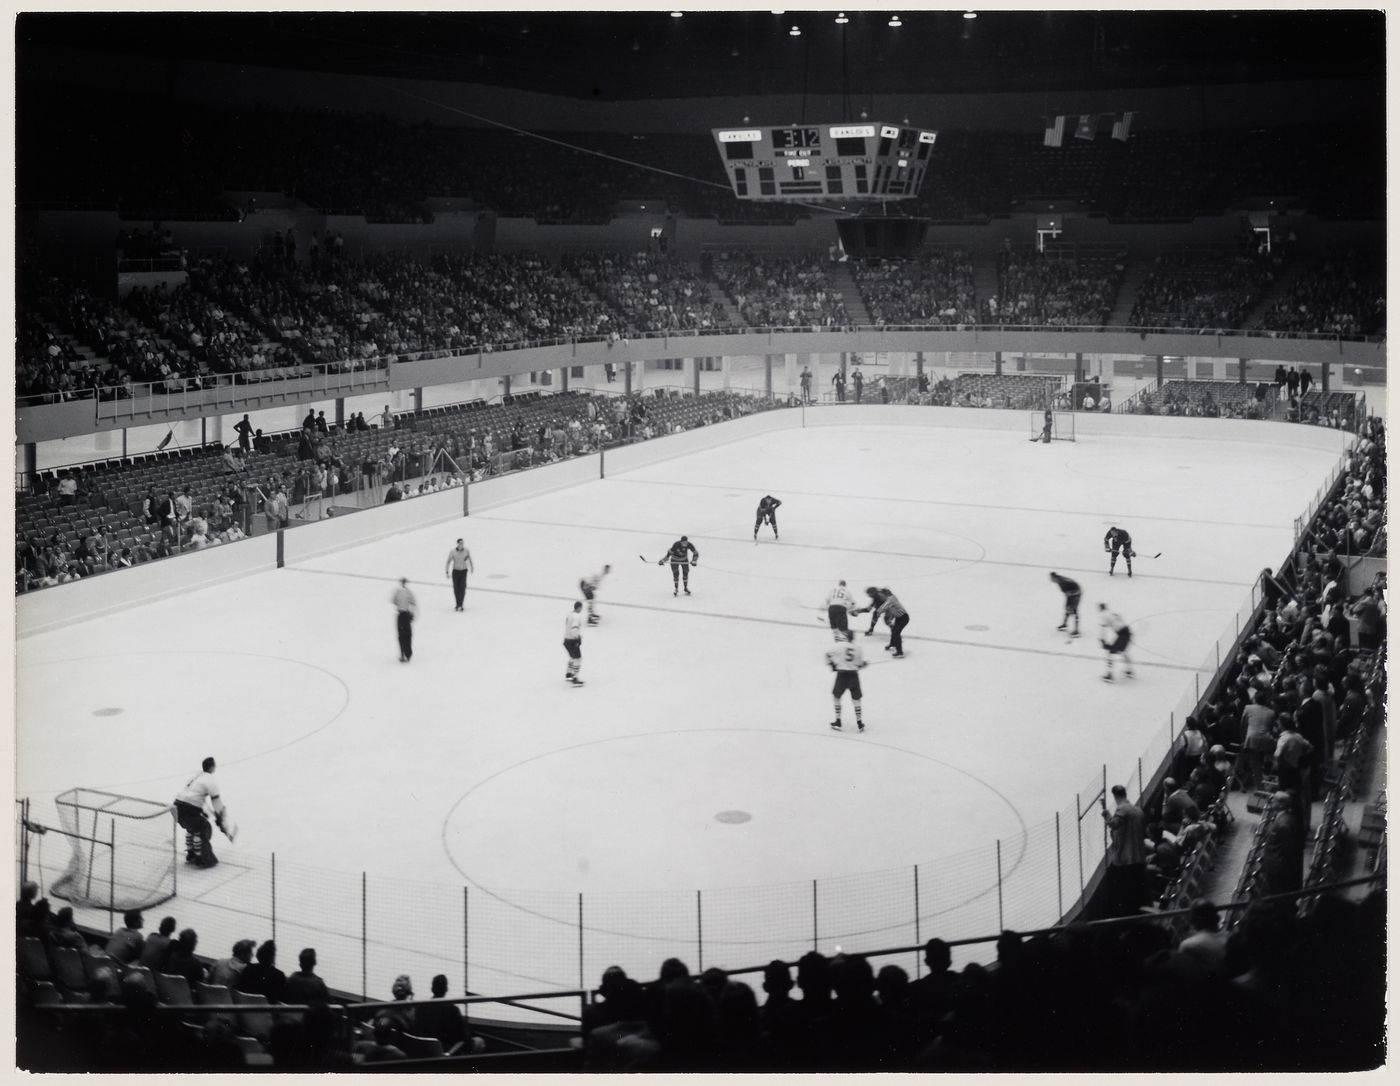 View of the Los Angeles Memorial Sports Arena during a hockey game, California, United States